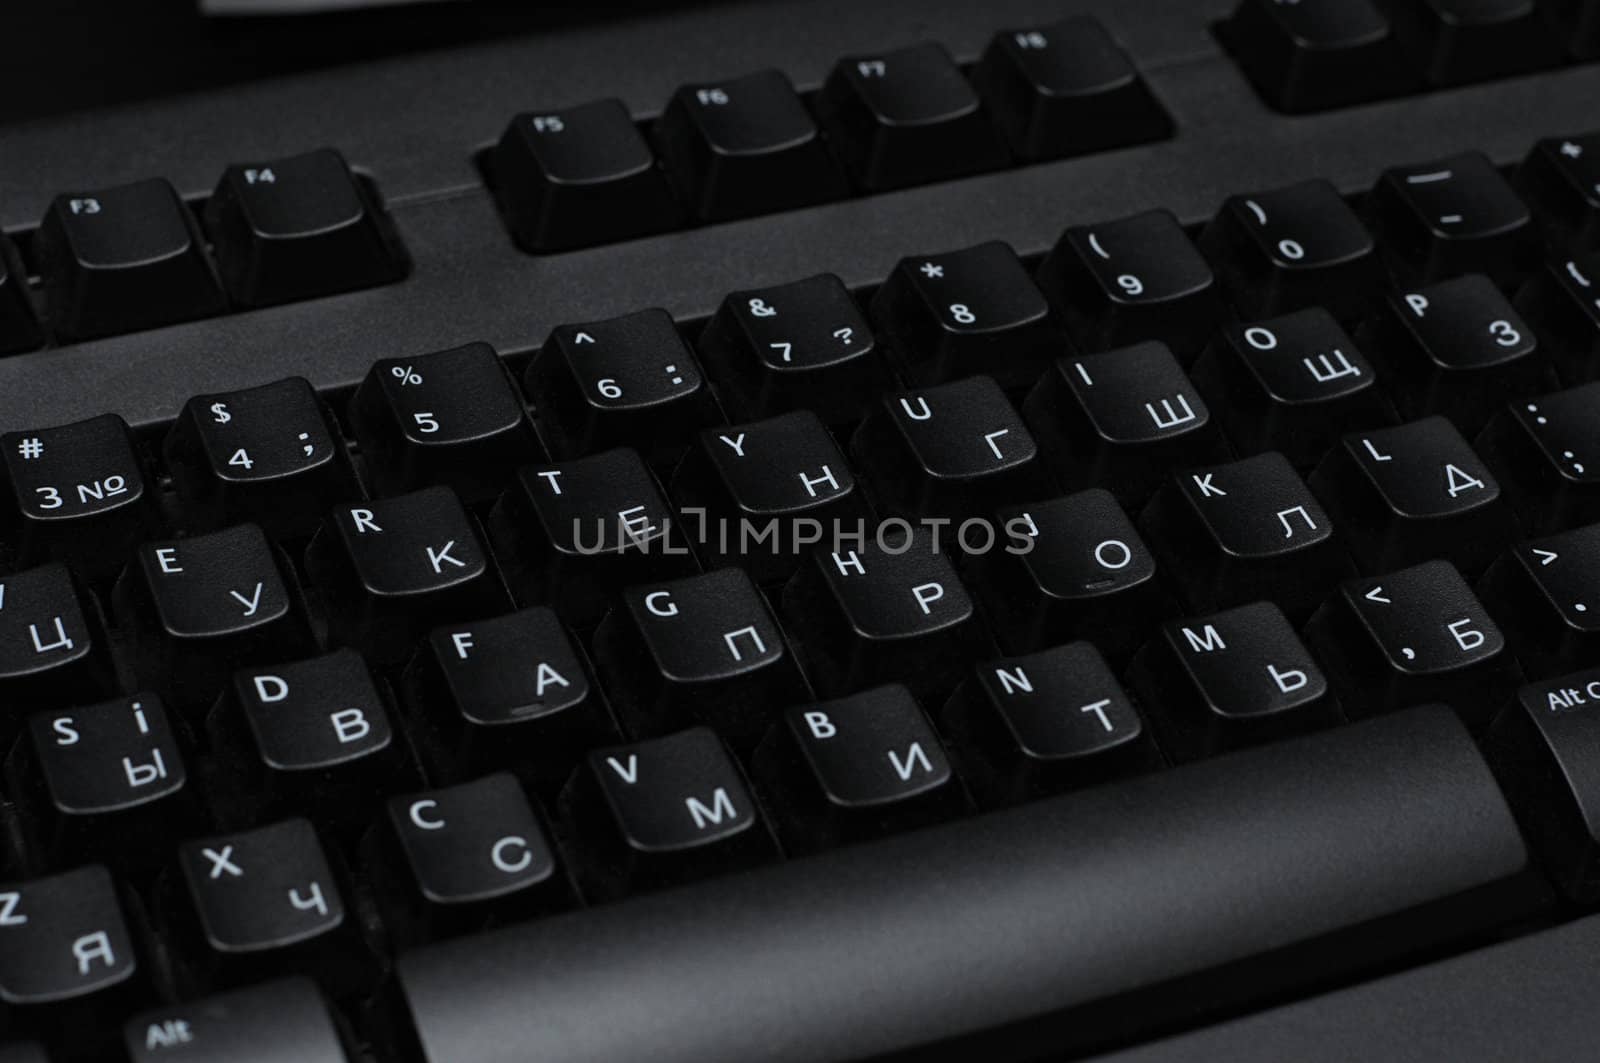 PC keyboard of black color close up view by DNKSTUDIO